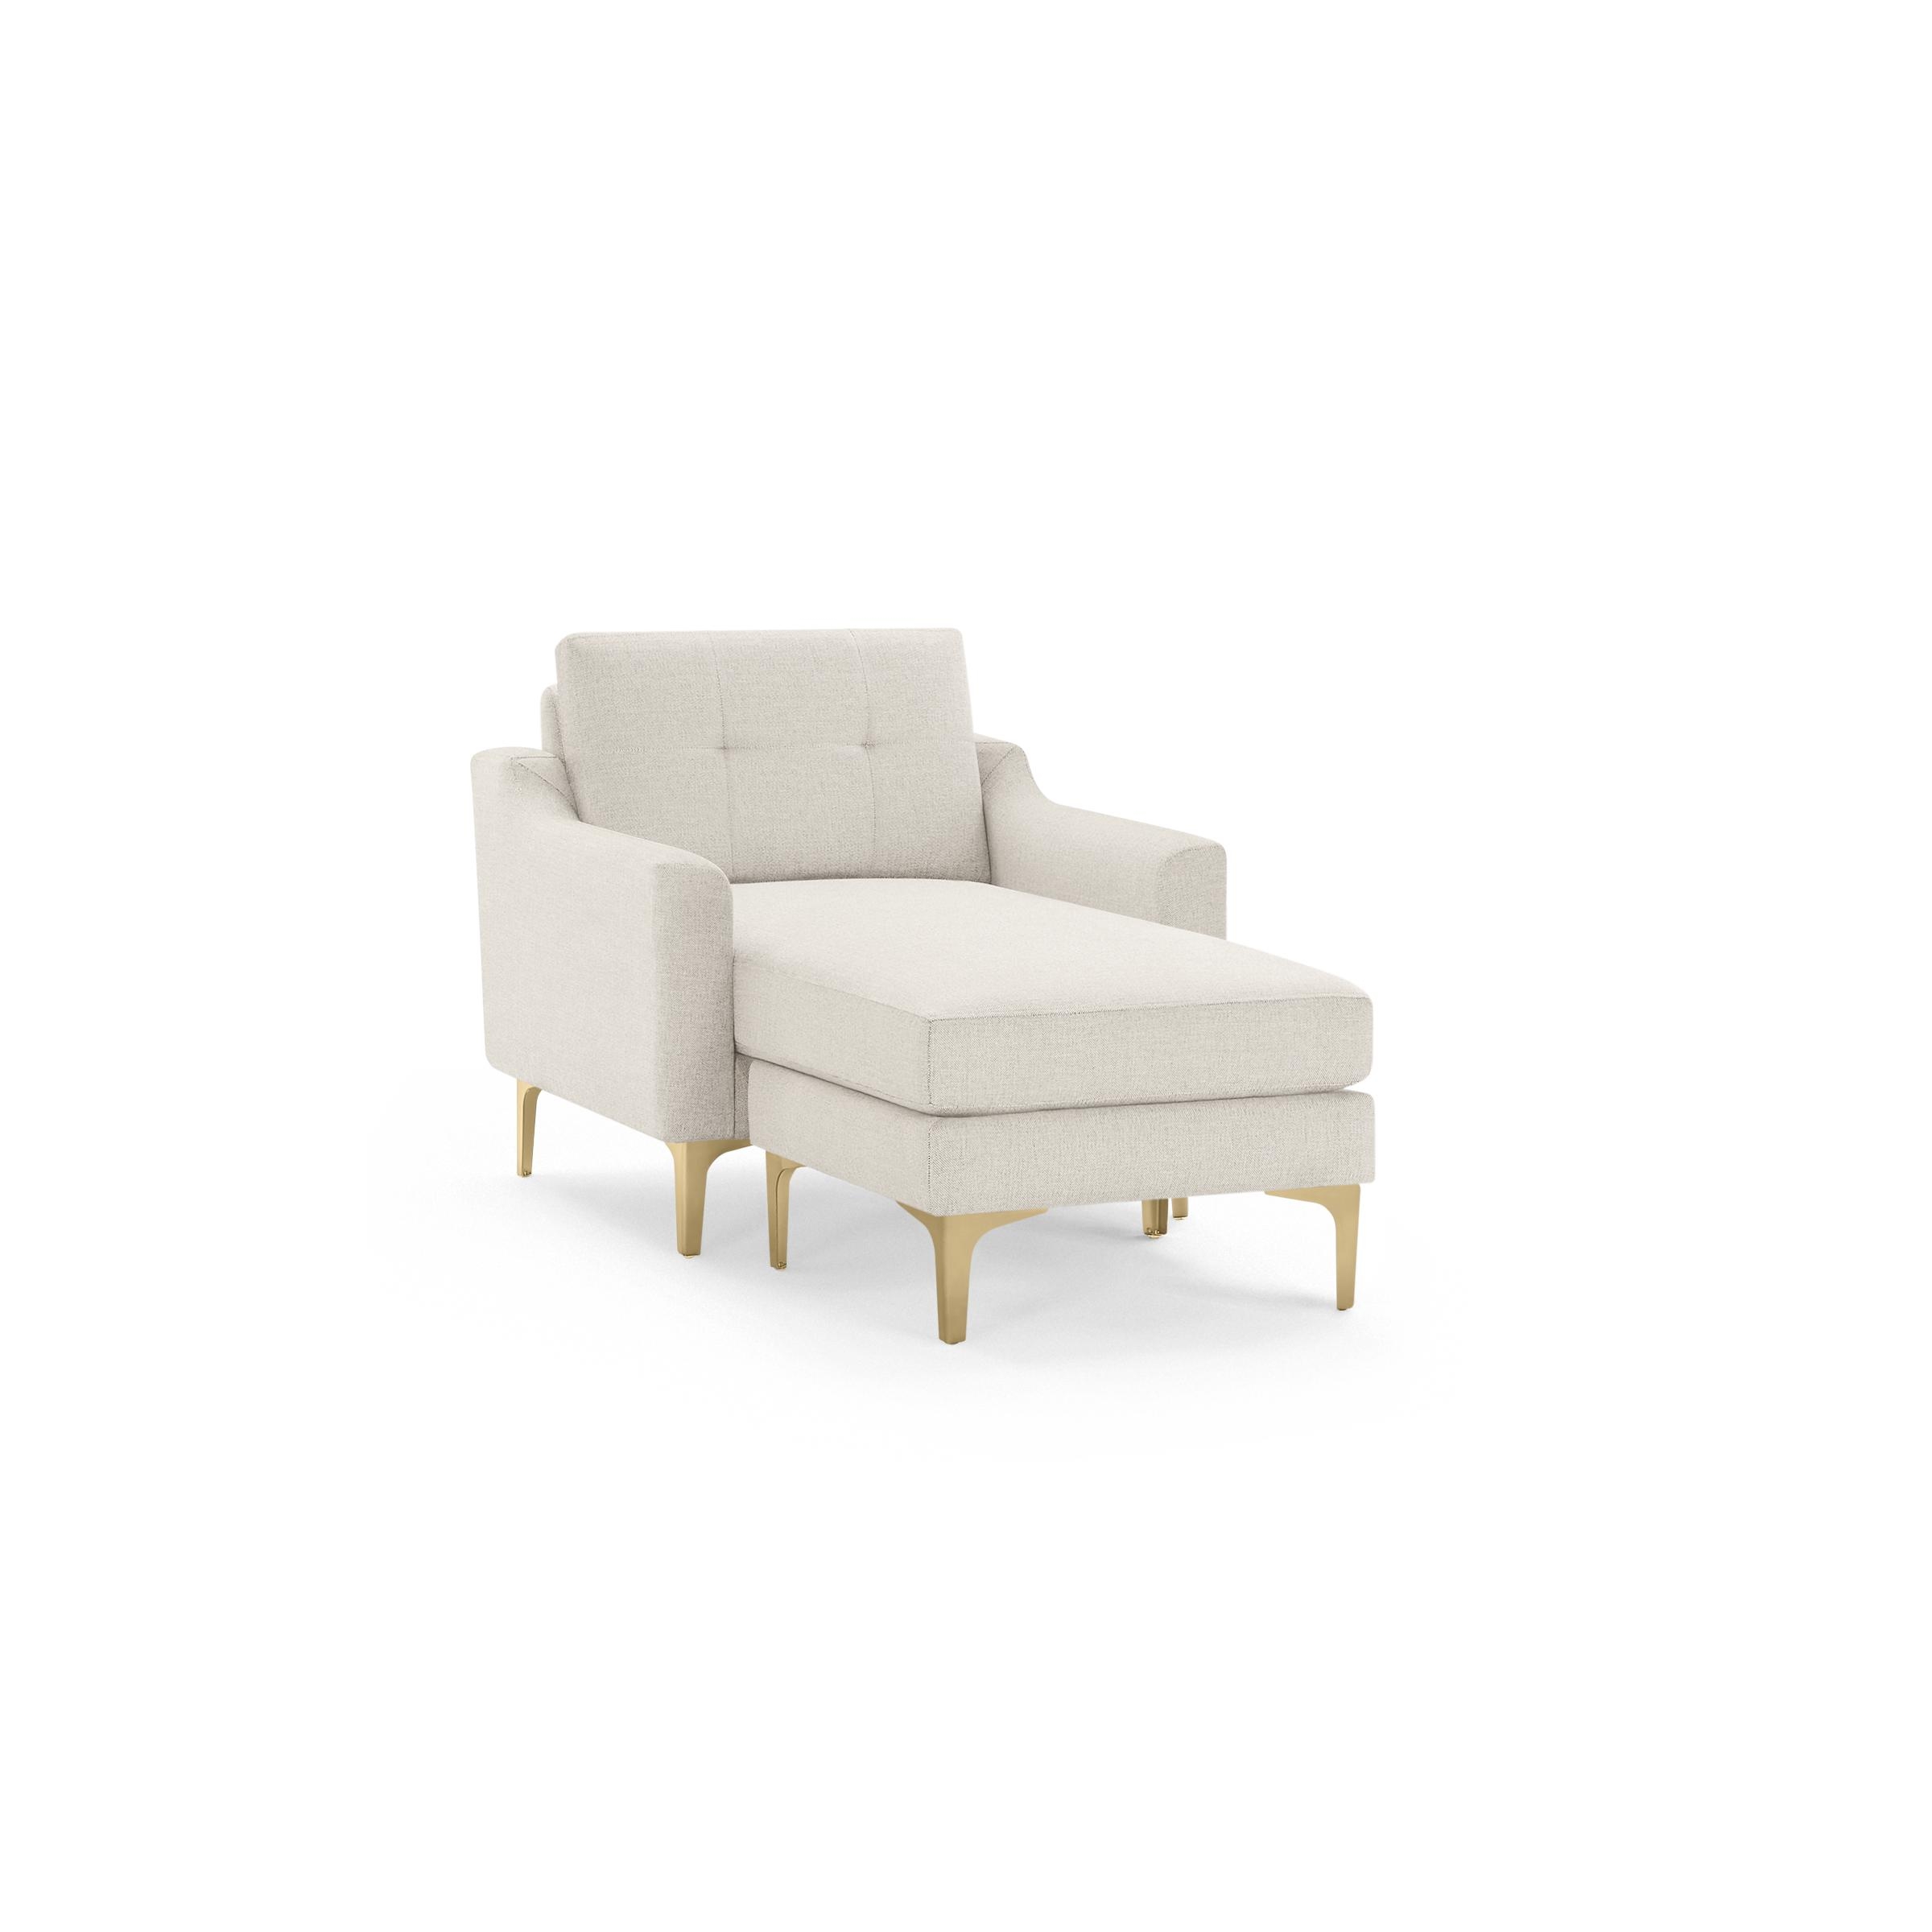 Nomad Armchair with Chaise in Ivory, Brass Legs - Image 0